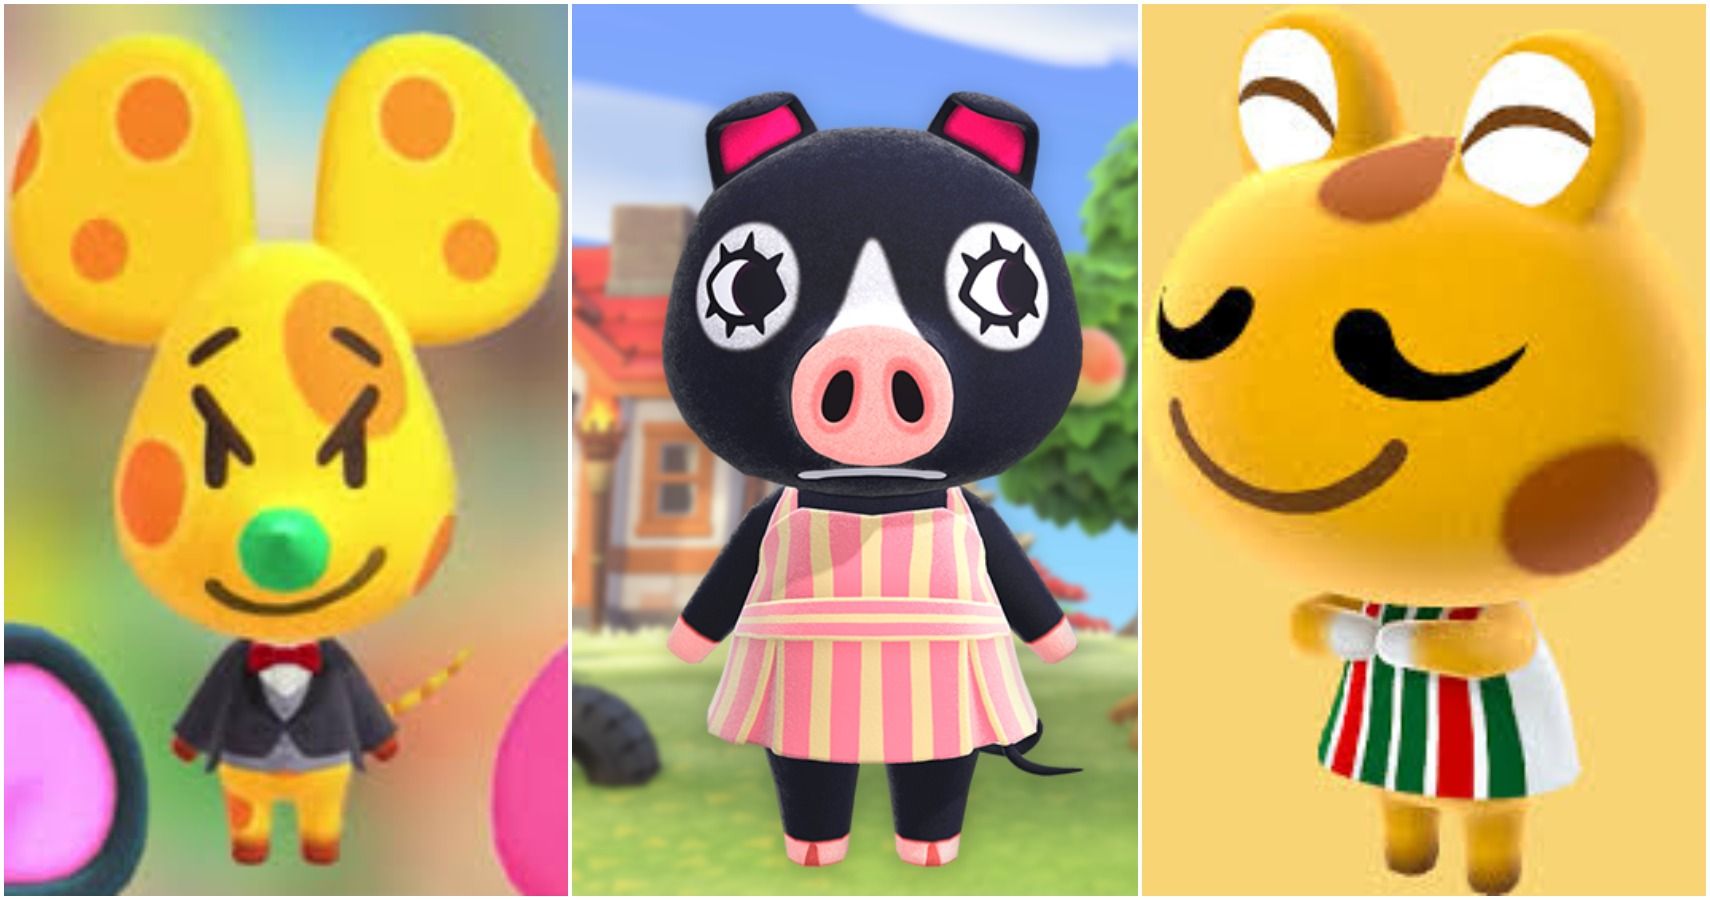 10 Underrated Animal Crossing Villagers | Game Rant